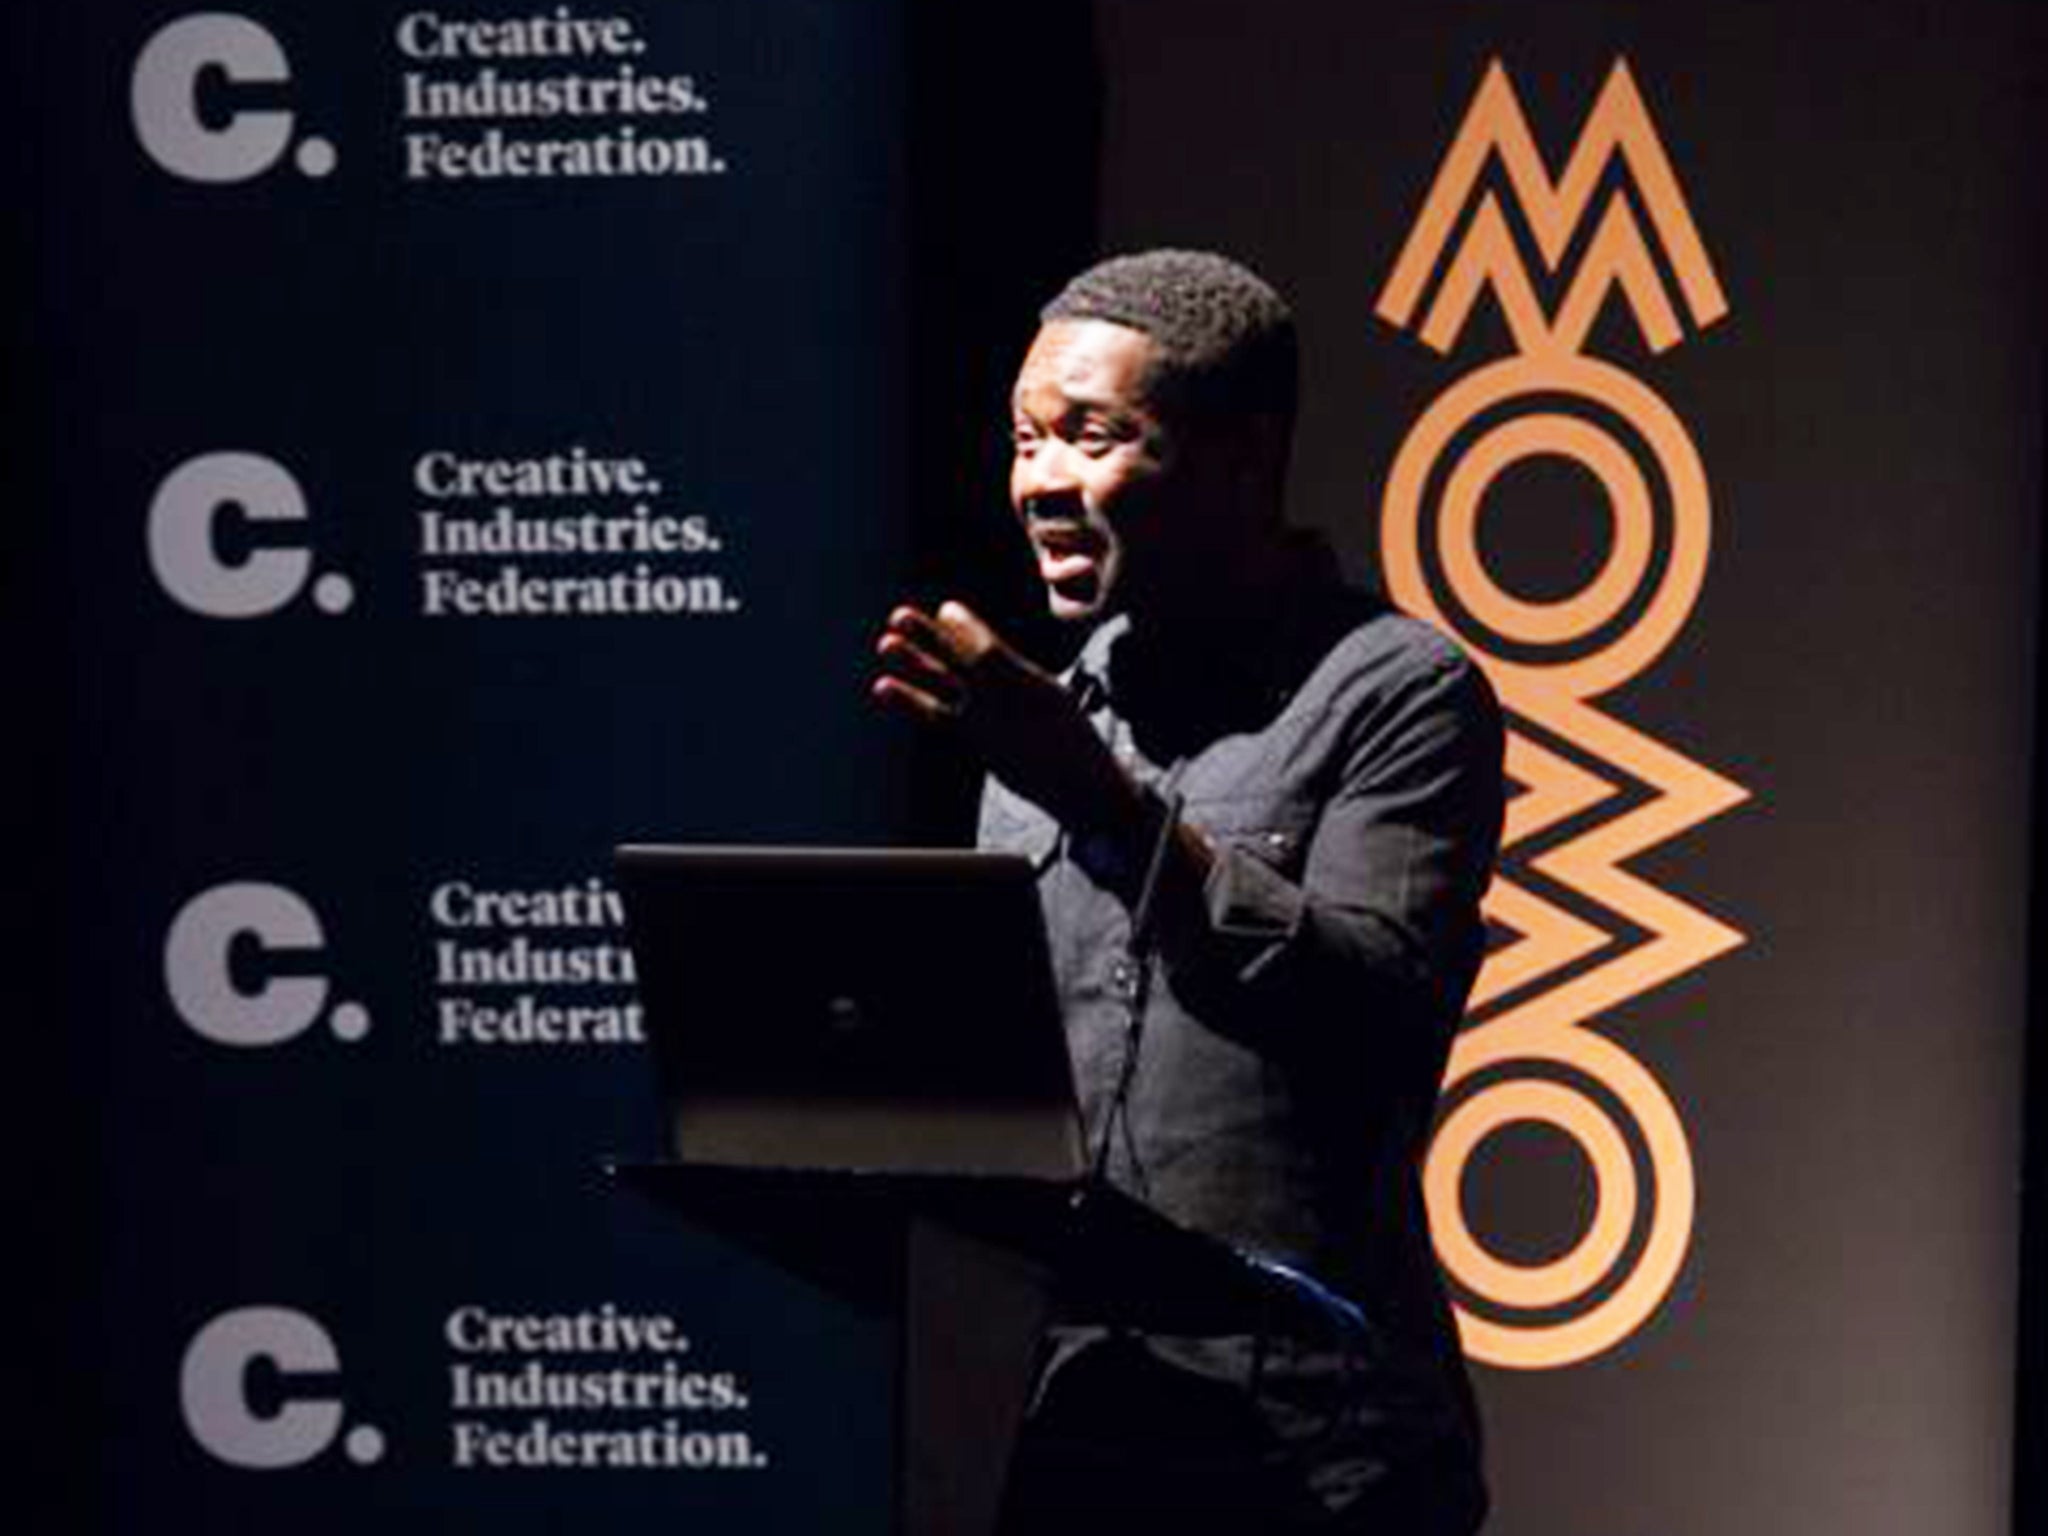 David Oyelowo, speaking at the launch of Mobo’s report into diversity in the UK’s creative industries on Monday